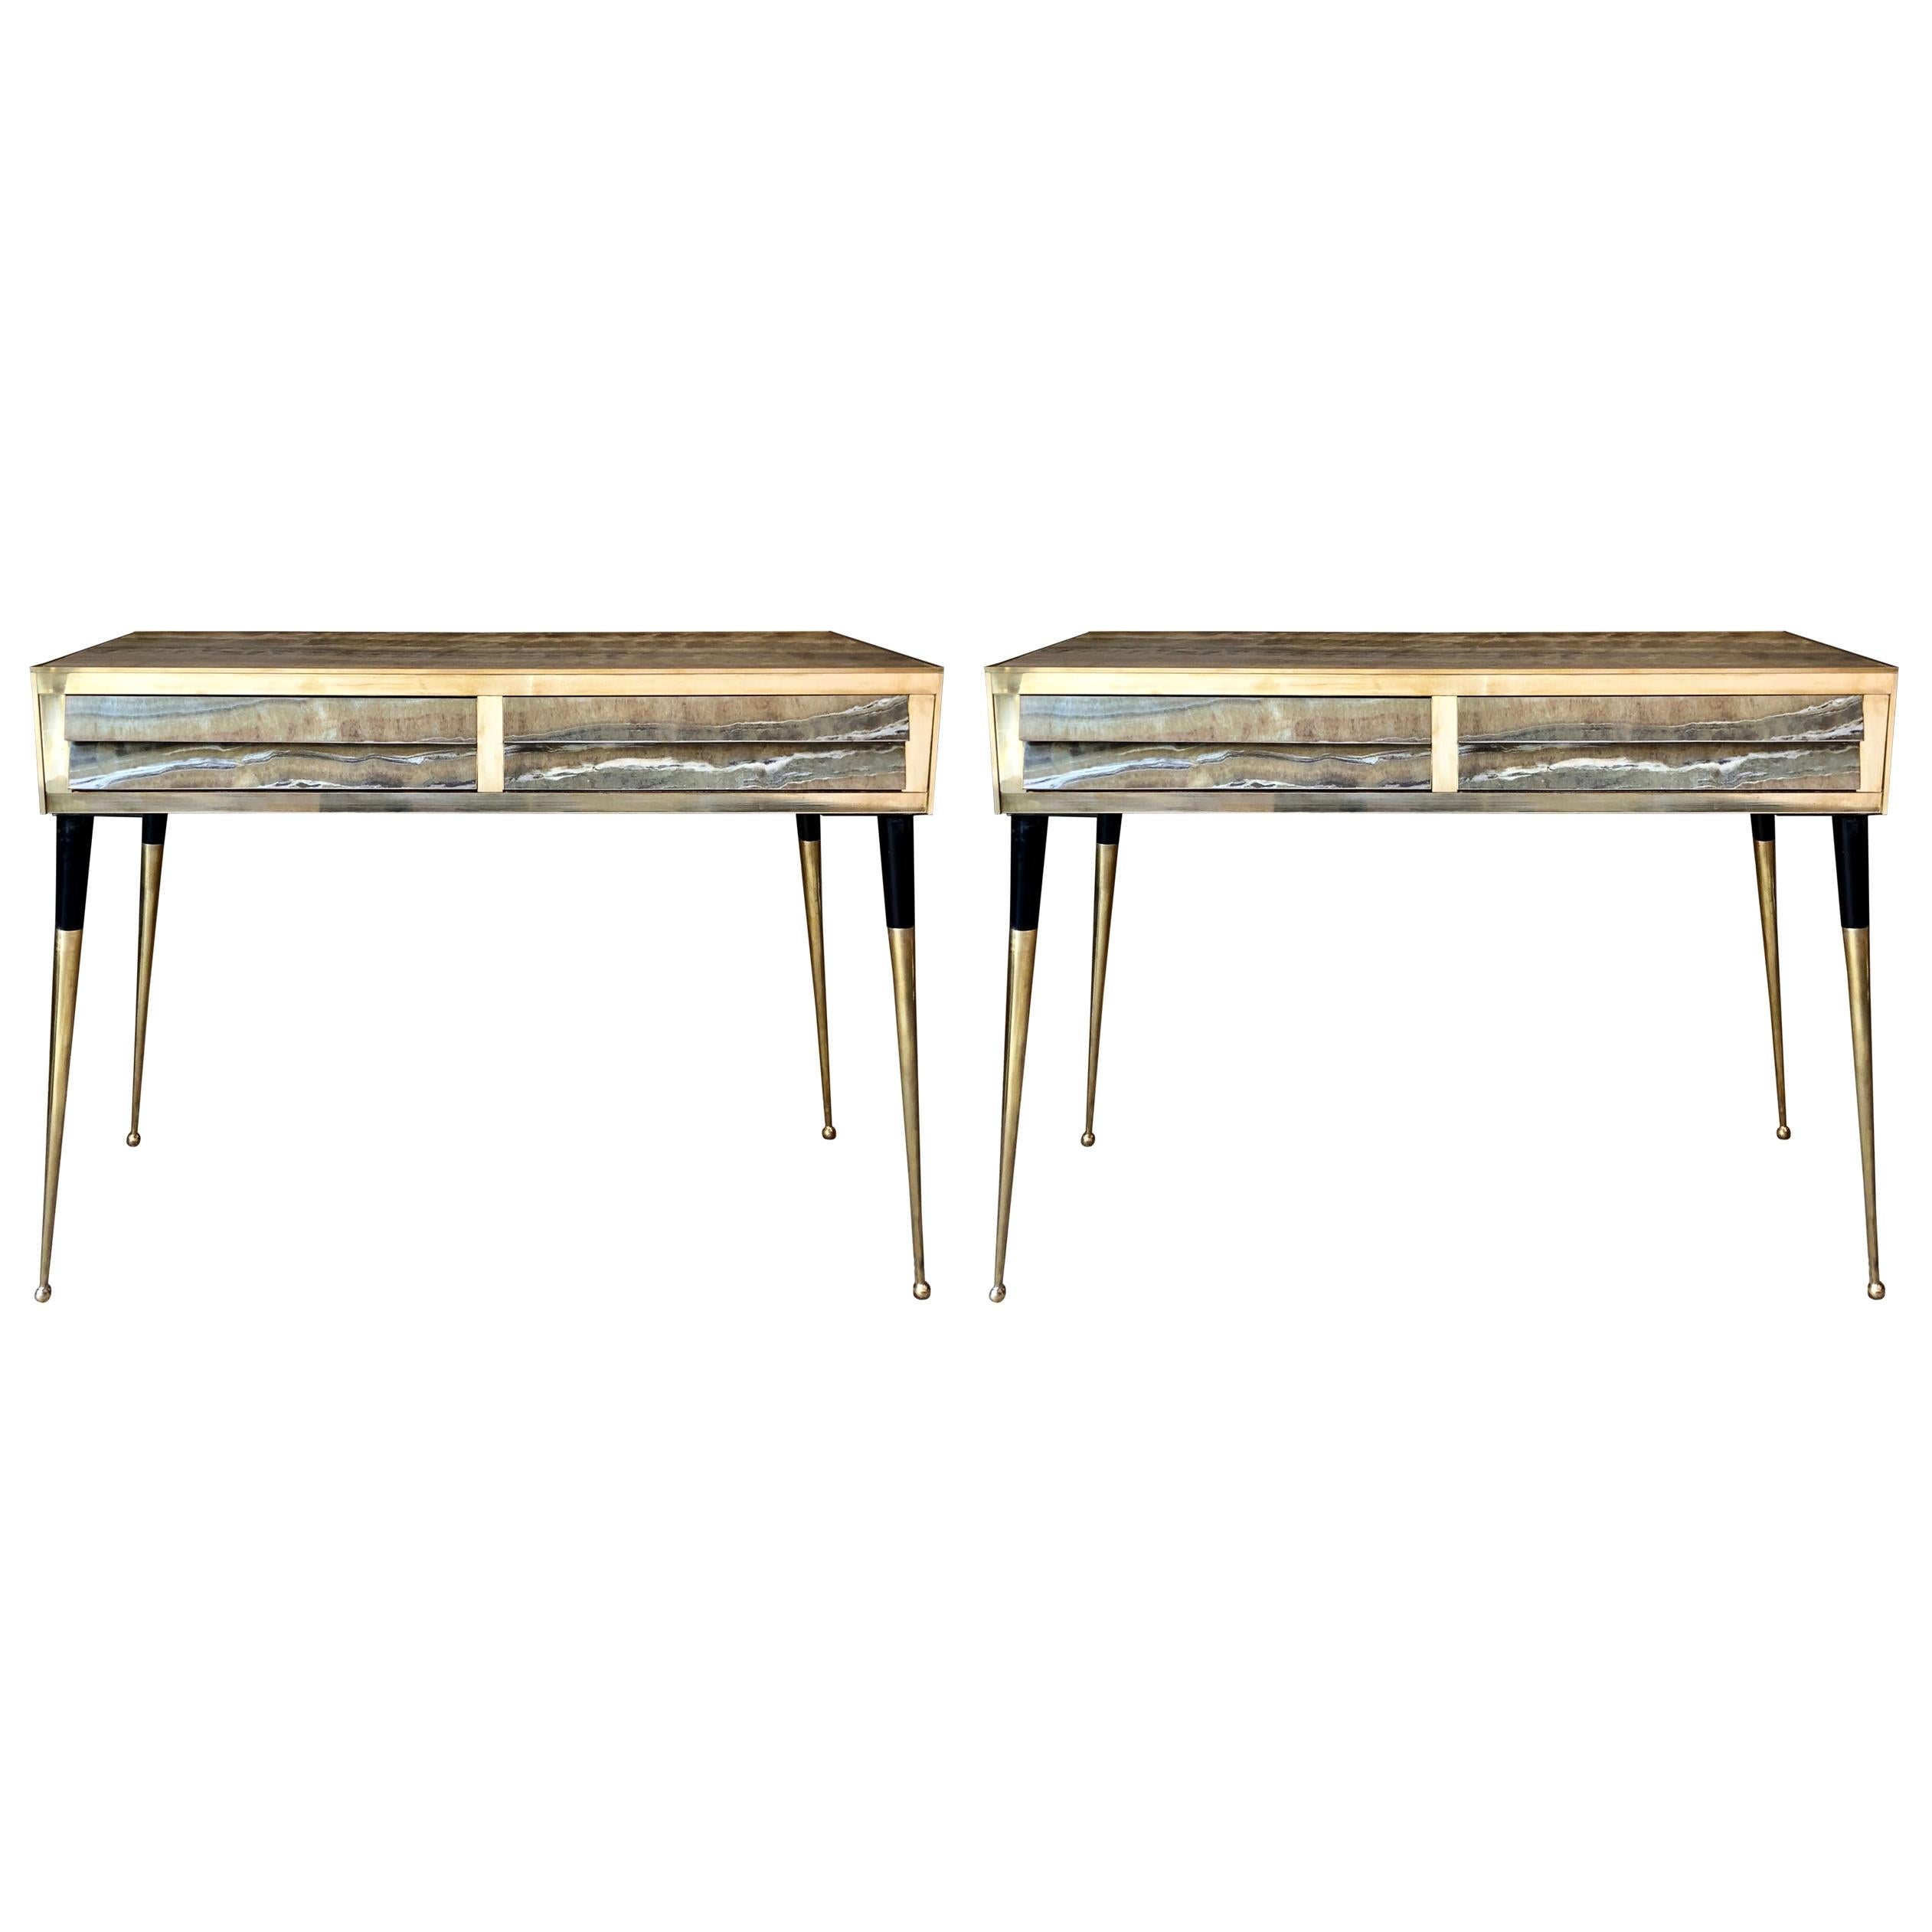 Late 20th Century Pair of Italian Green Faux Onyx Consoles with Brass Details